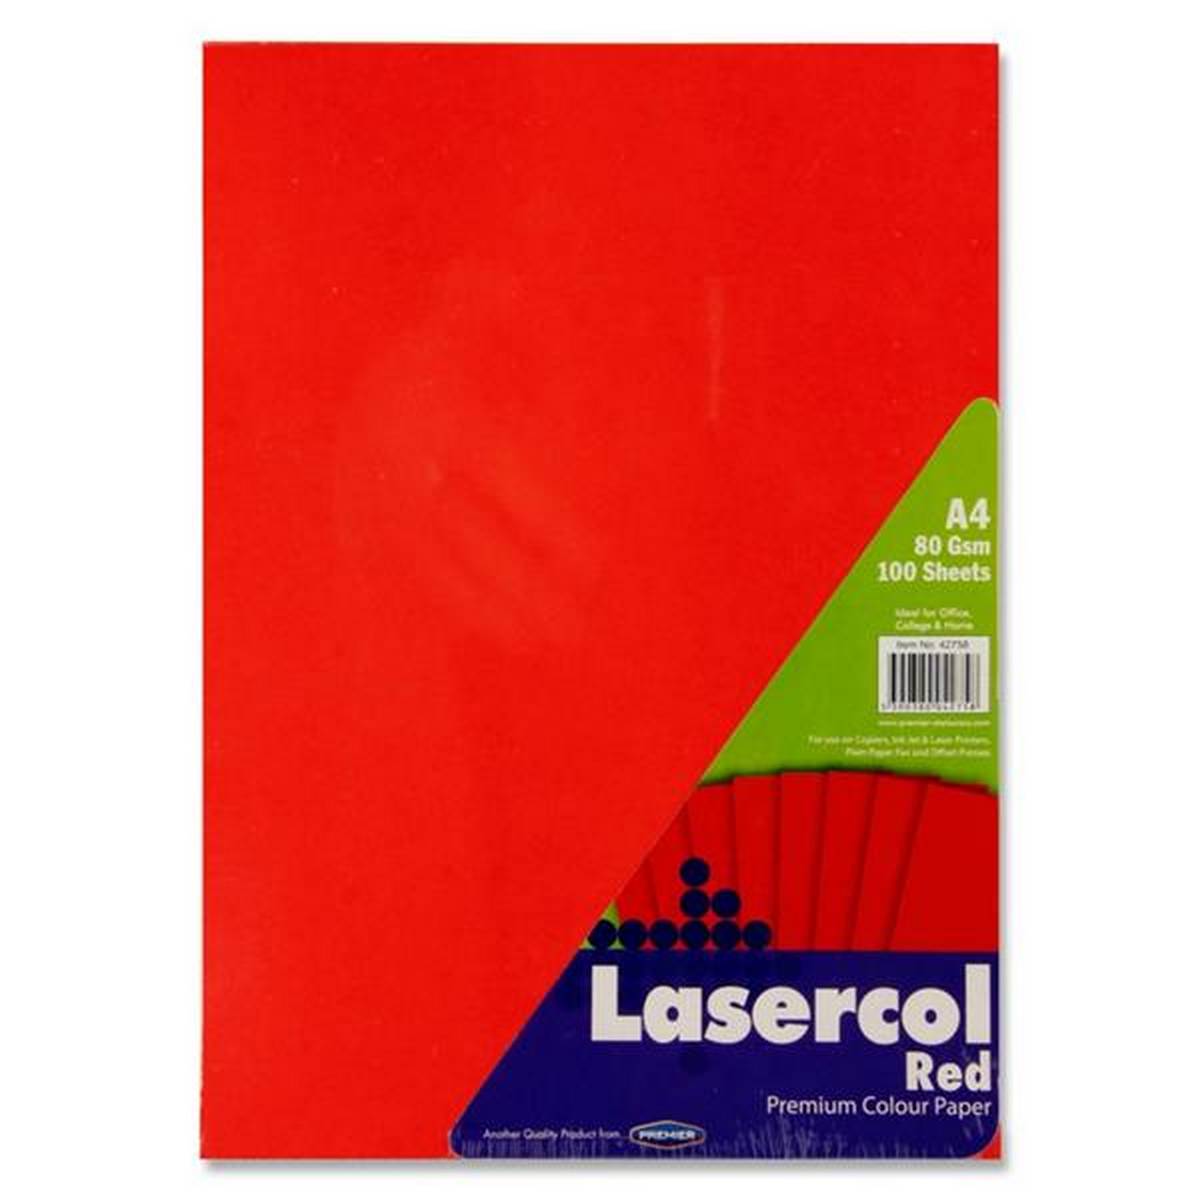 A4 Red Paper 80gms (Pack of 100 Sheets)